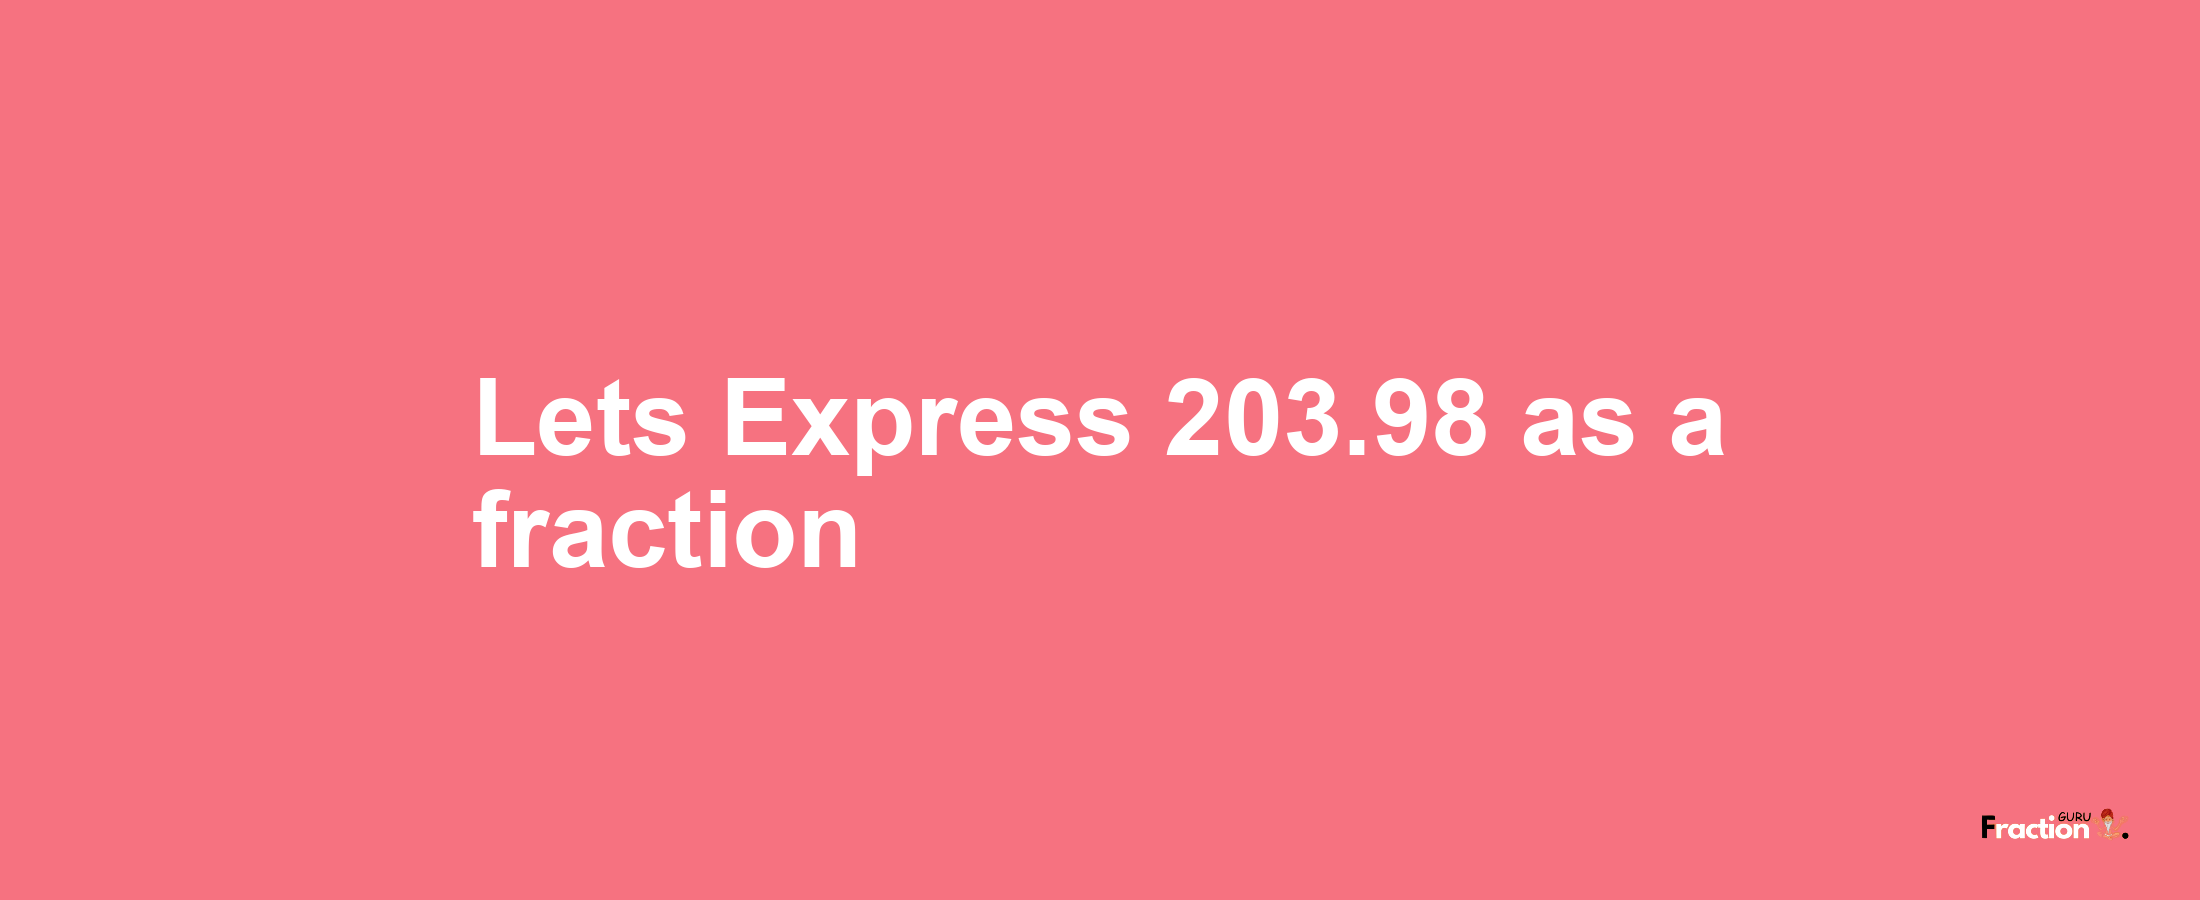 Lets Express 203.98 as afraction